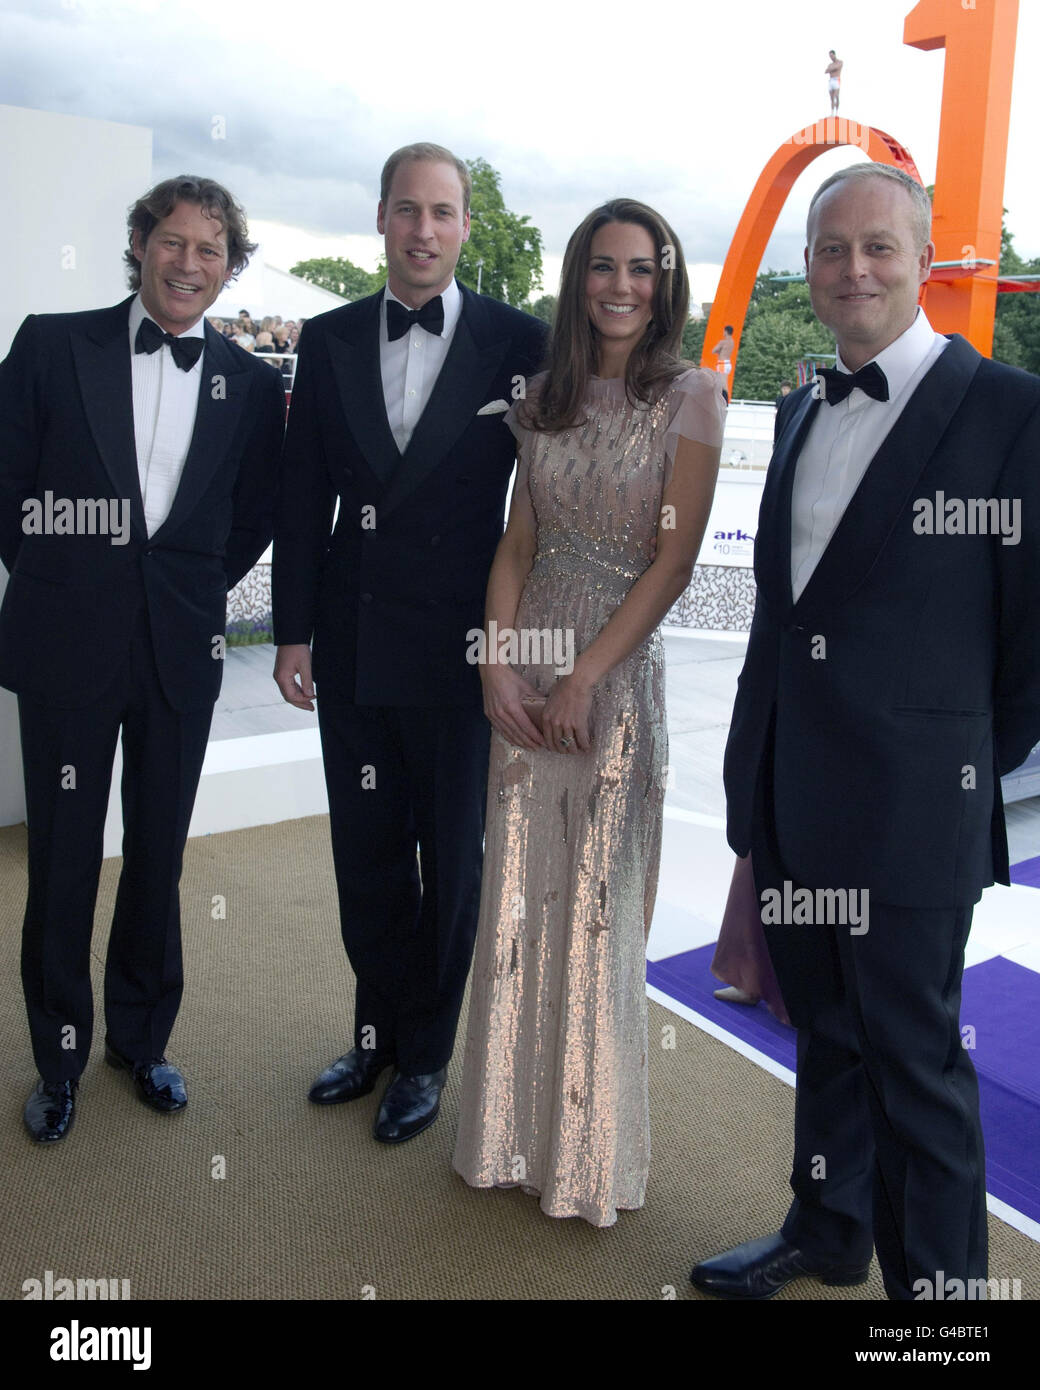 The Duke and the Duchess of Cambridge attended at the 10th annual ARK (Absolute Return for Kids) Gala Dinner on behalf of The Foundation of Prince William and Prince Harry at Perks Field, Kensington Palace, along with co founders Arpad Busson (left) and Ian Wace (right). Stock Photo